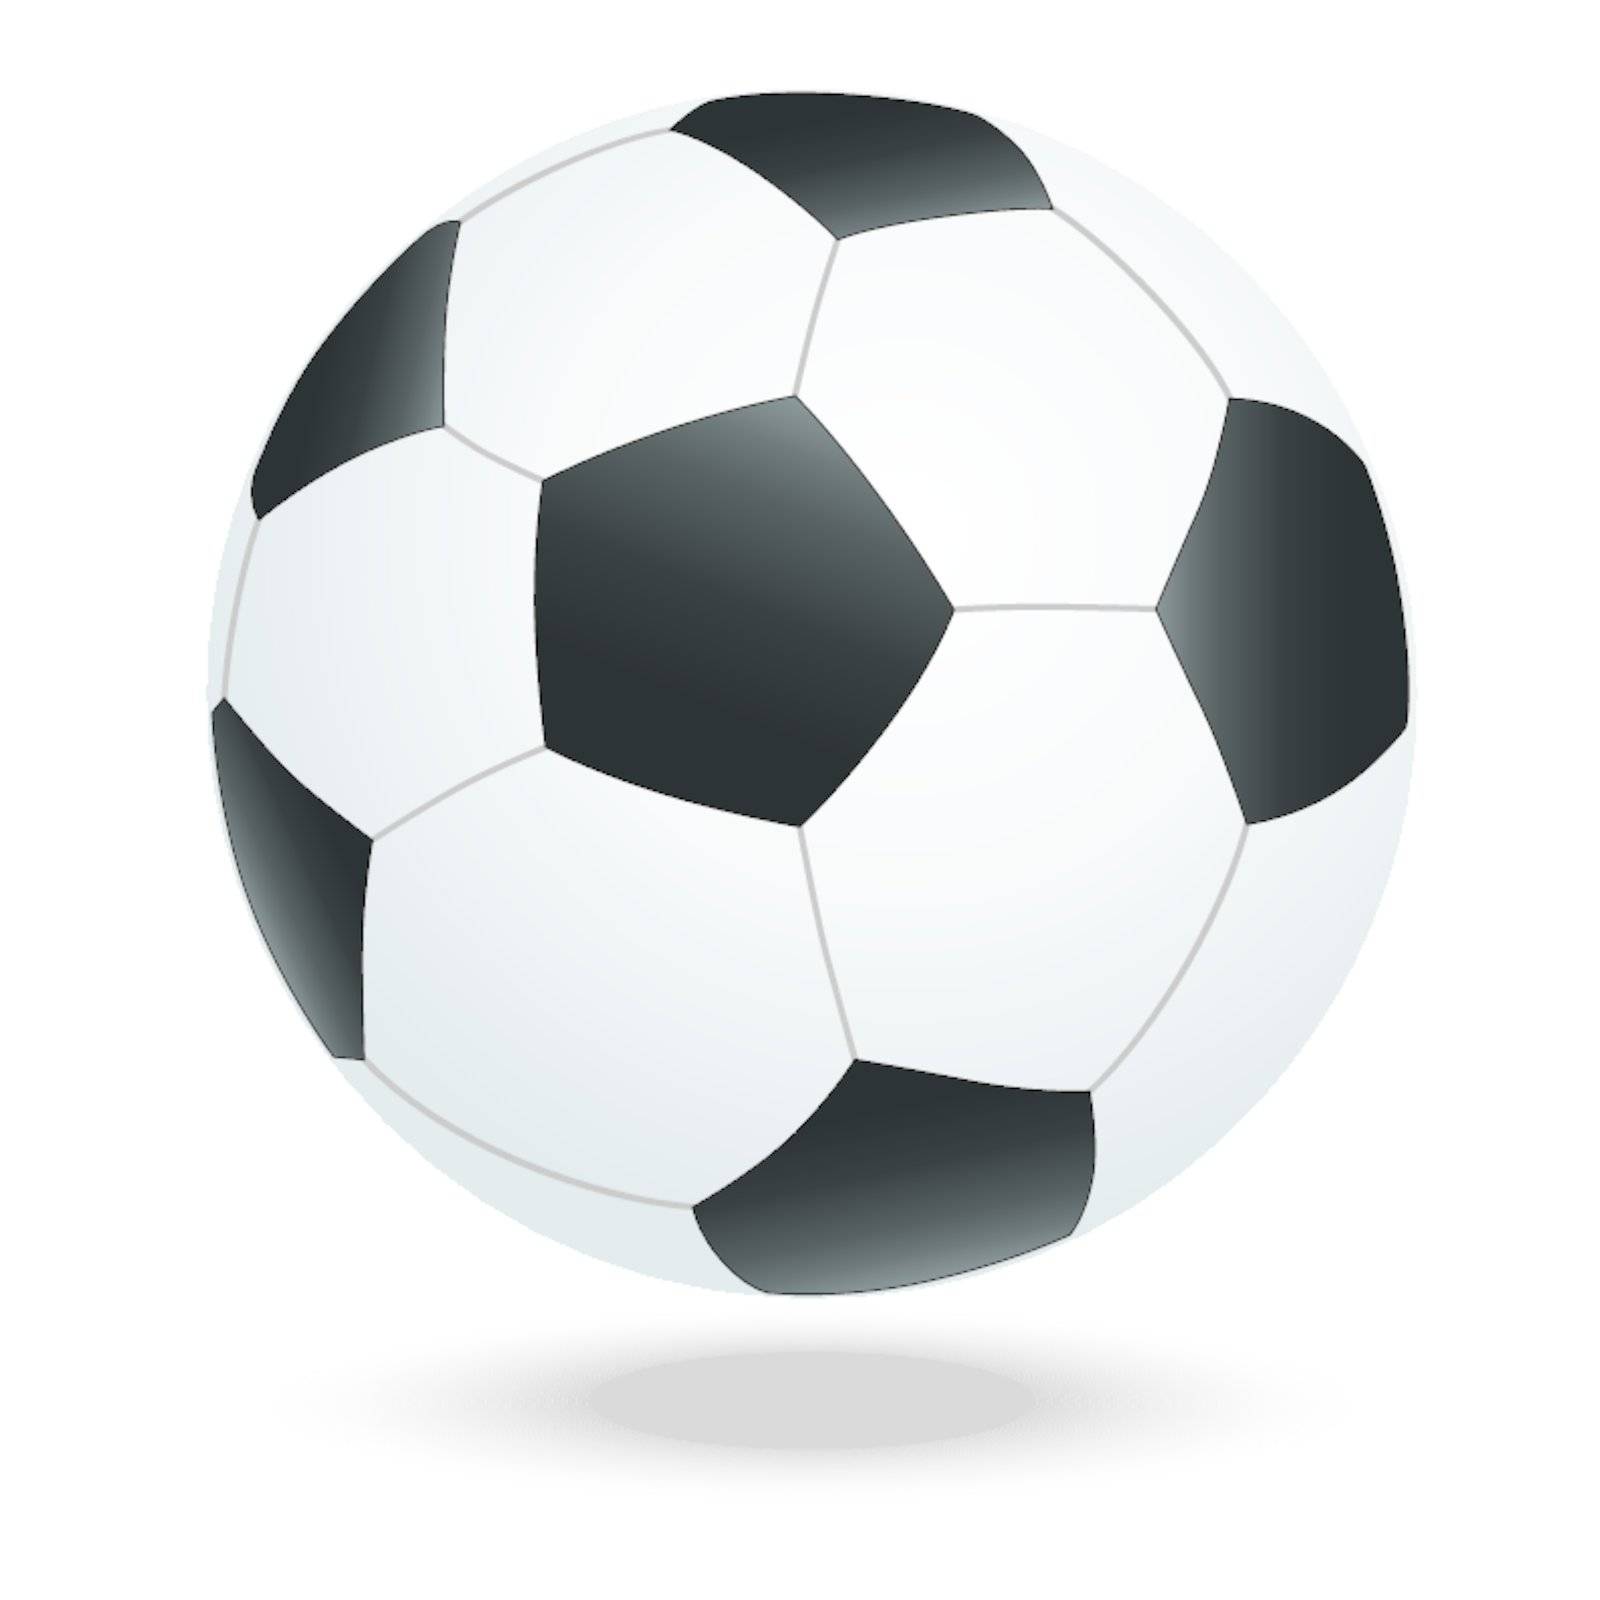 illustration of highly rendered soccer ball, football, isolated in white background.